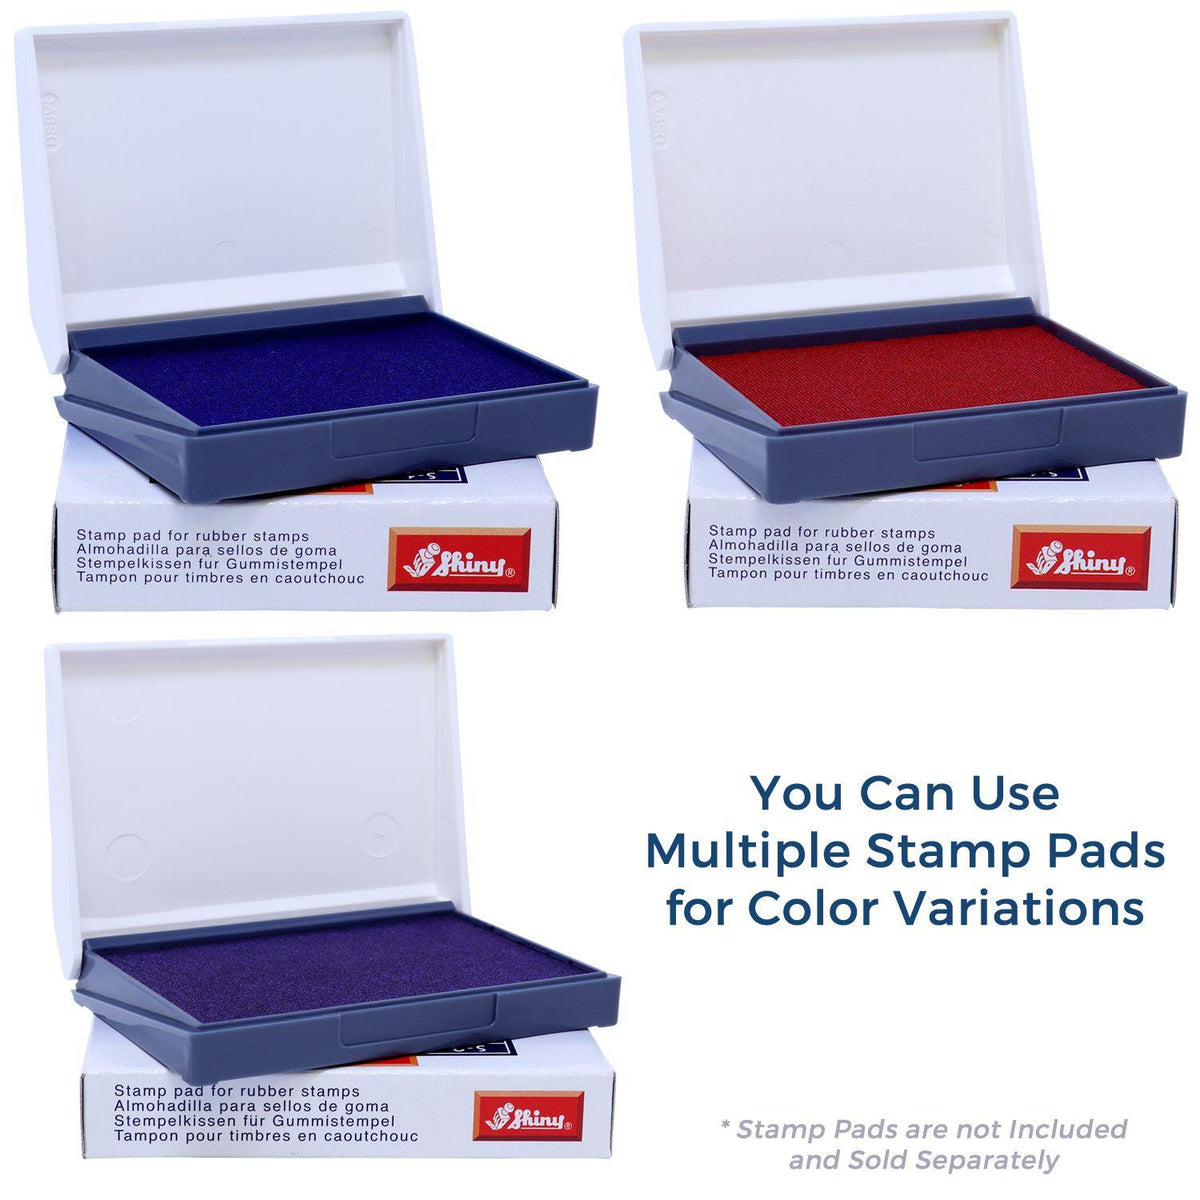 Stamp Pads for Large Disclosures Rubber Stamp Available